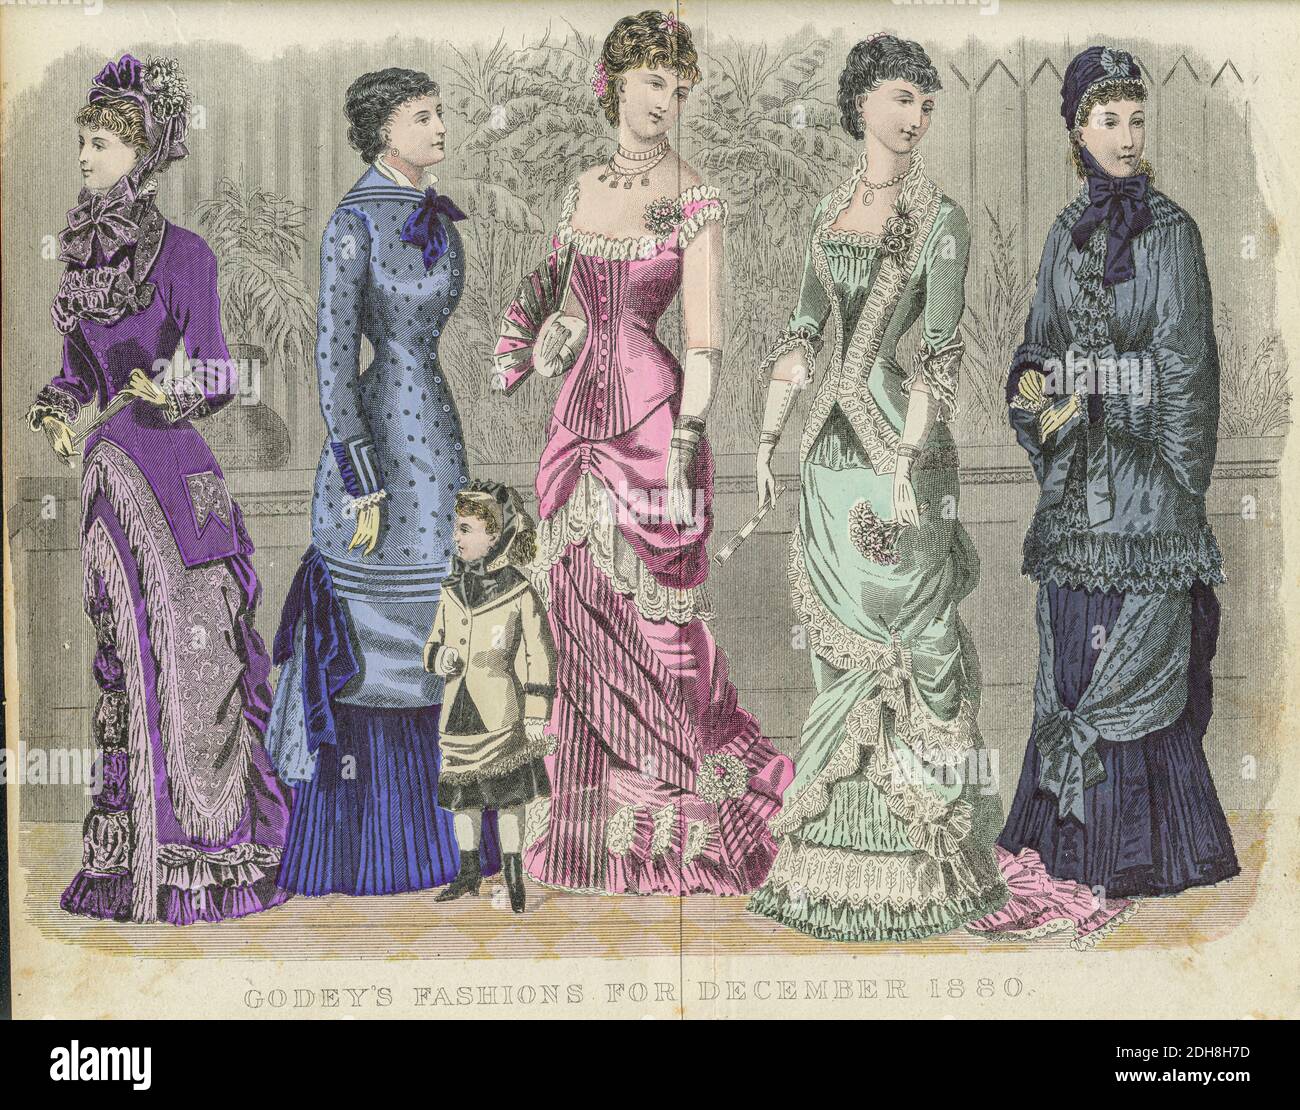 Colour drawing of Godey's women's Fashion for December 1880 from Godey's Lady's Book and Magazine, 1880 Philadelphia, Louis A. Godey, Sarah Josepha Hale, Stock Photo